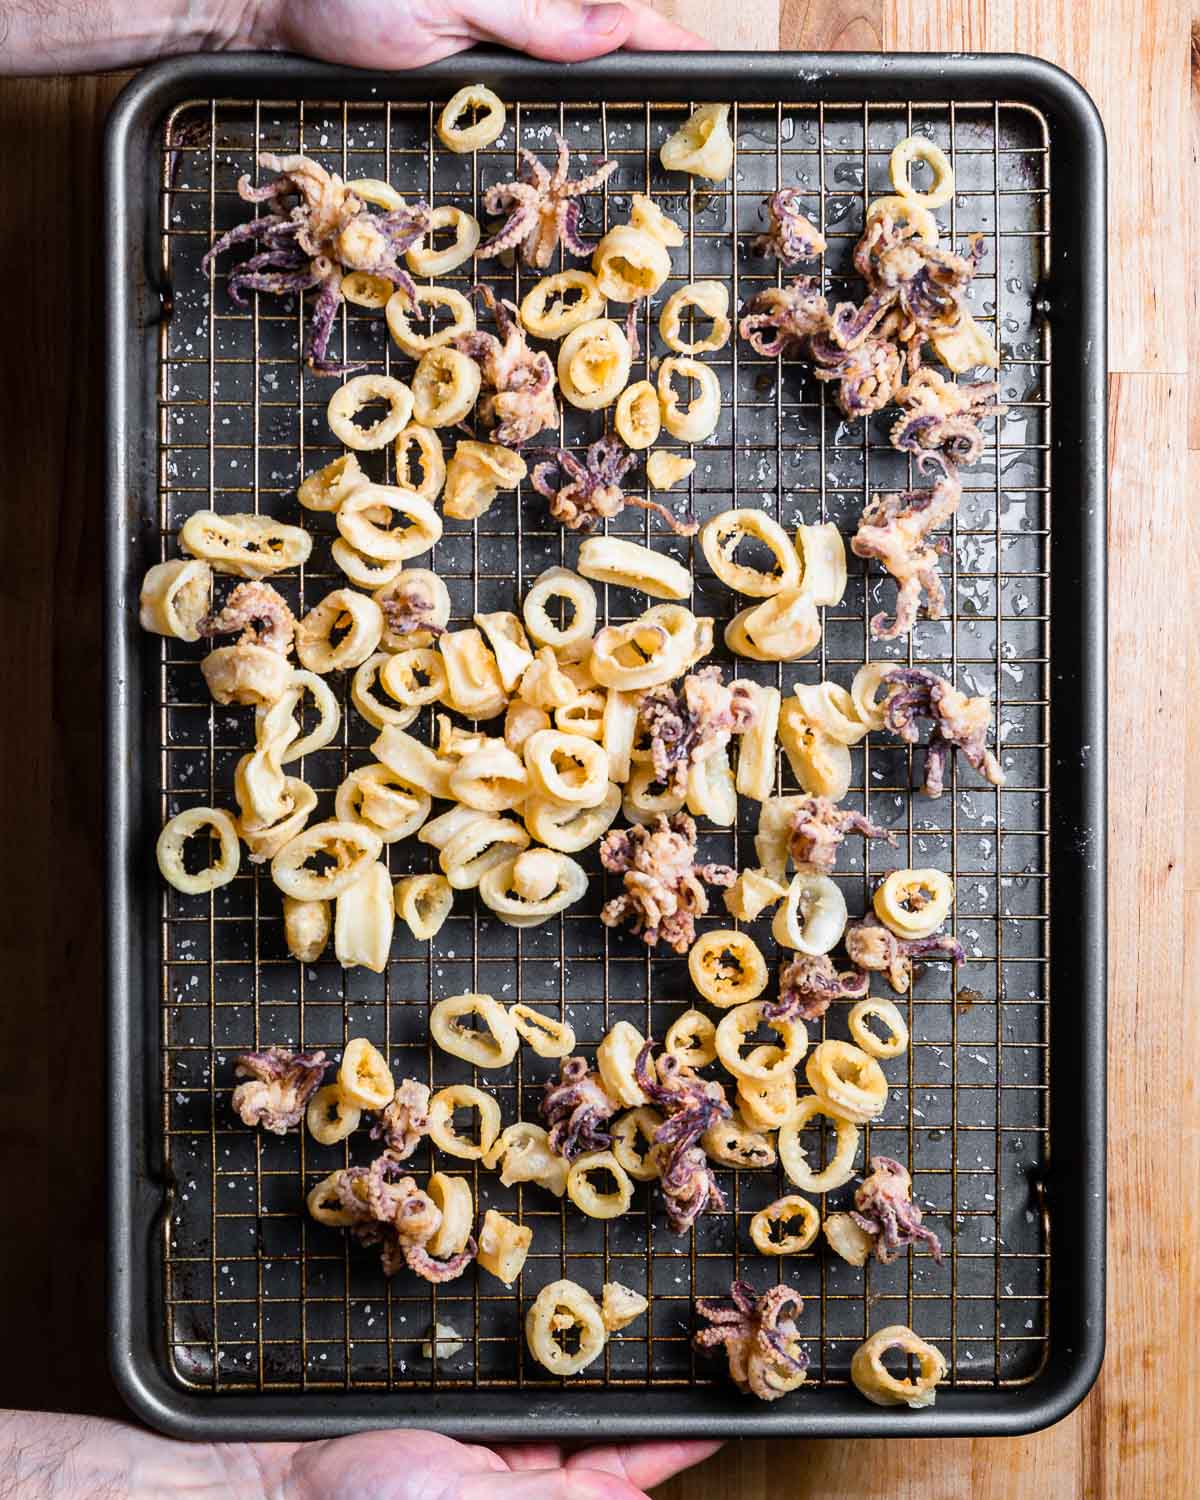 Hands holding baking sheet and wire rack with fried calamari.